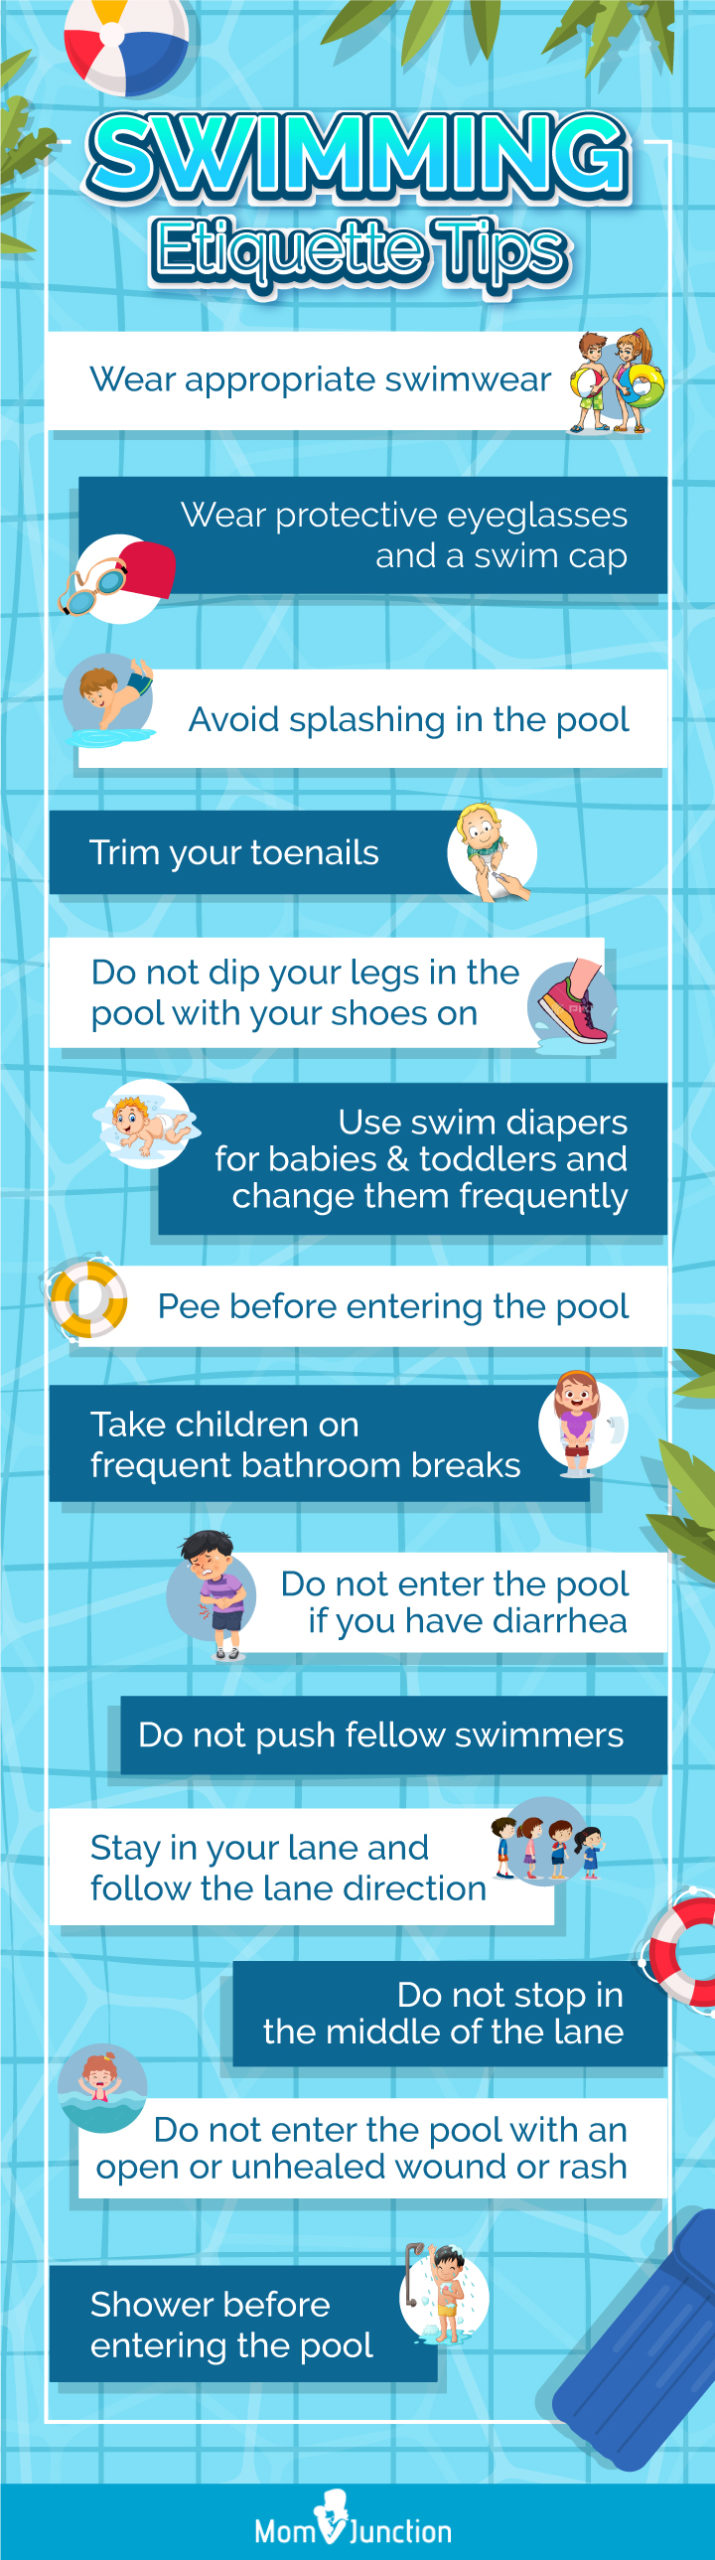 swimming etiquette tips [infographic]